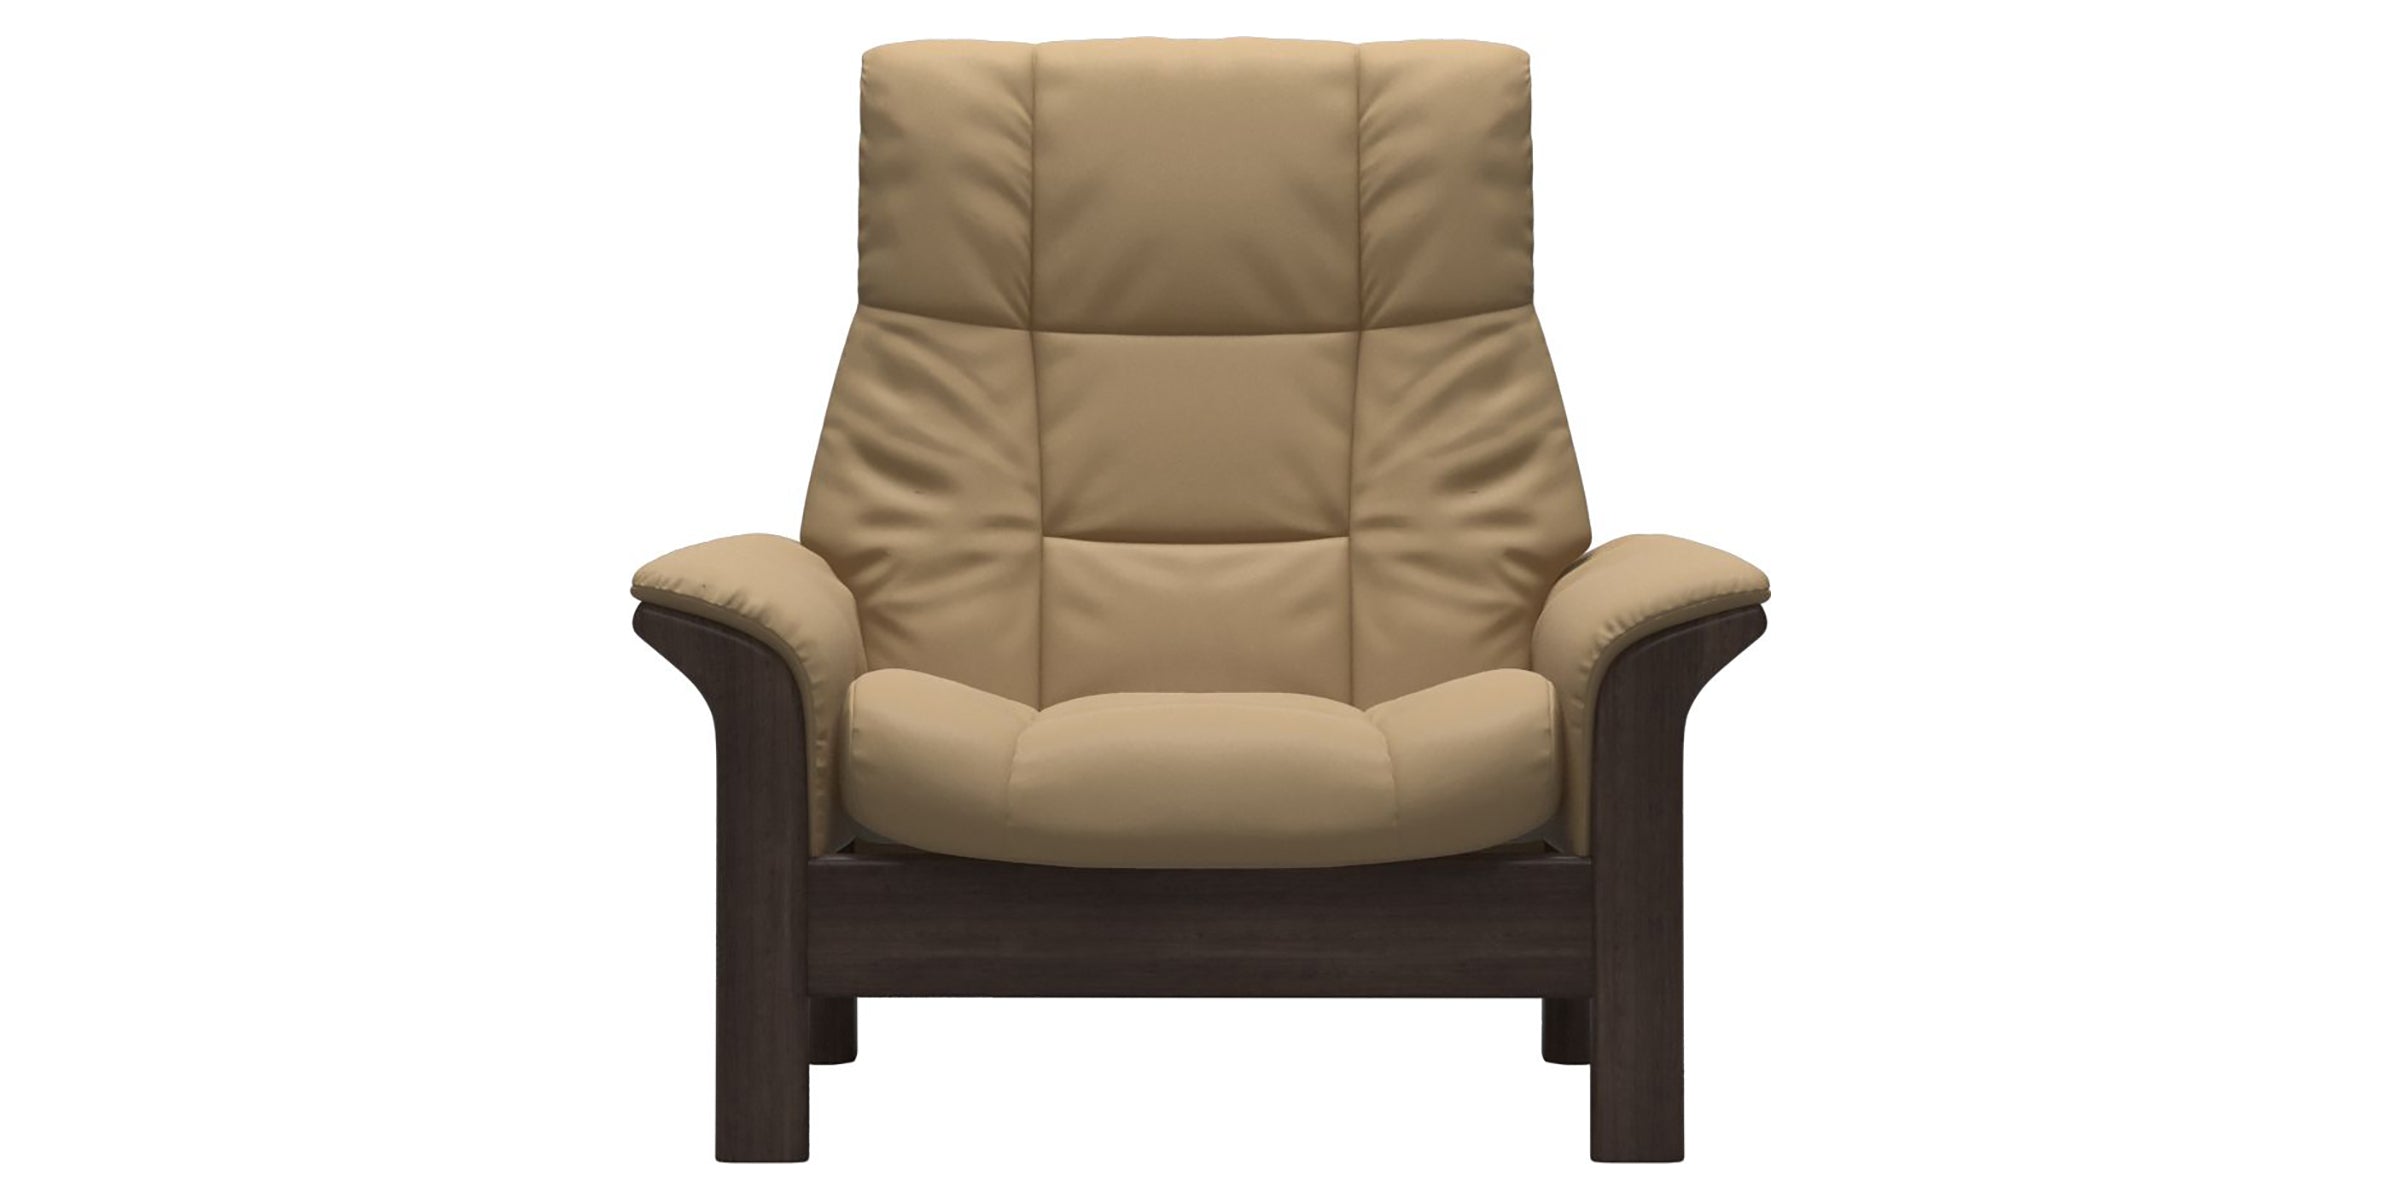 Paloma Leather Sand and Wenge Base | Stressless Buckingham High Back Chair | Valley Ridge Furniture